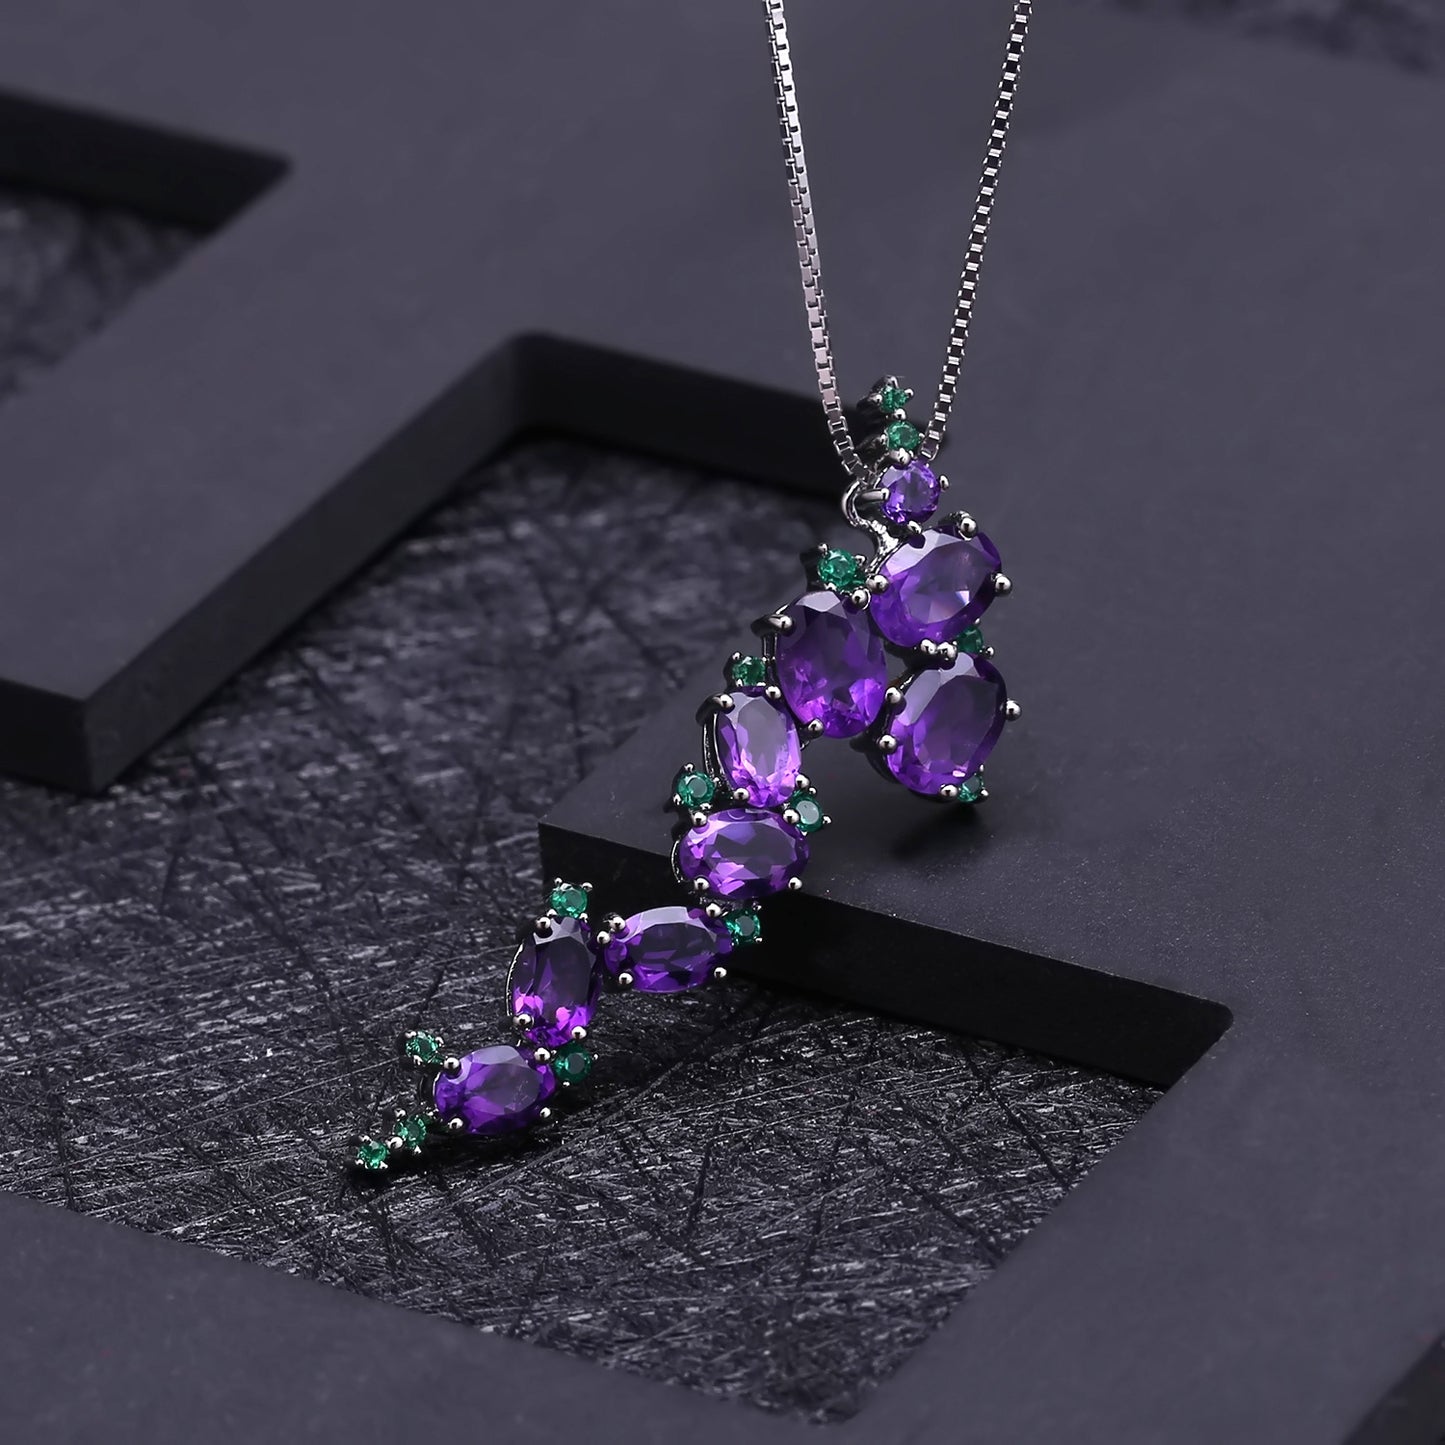 Italian Design Luxury Natural Amethyst Pendant Silver Necklace for Women